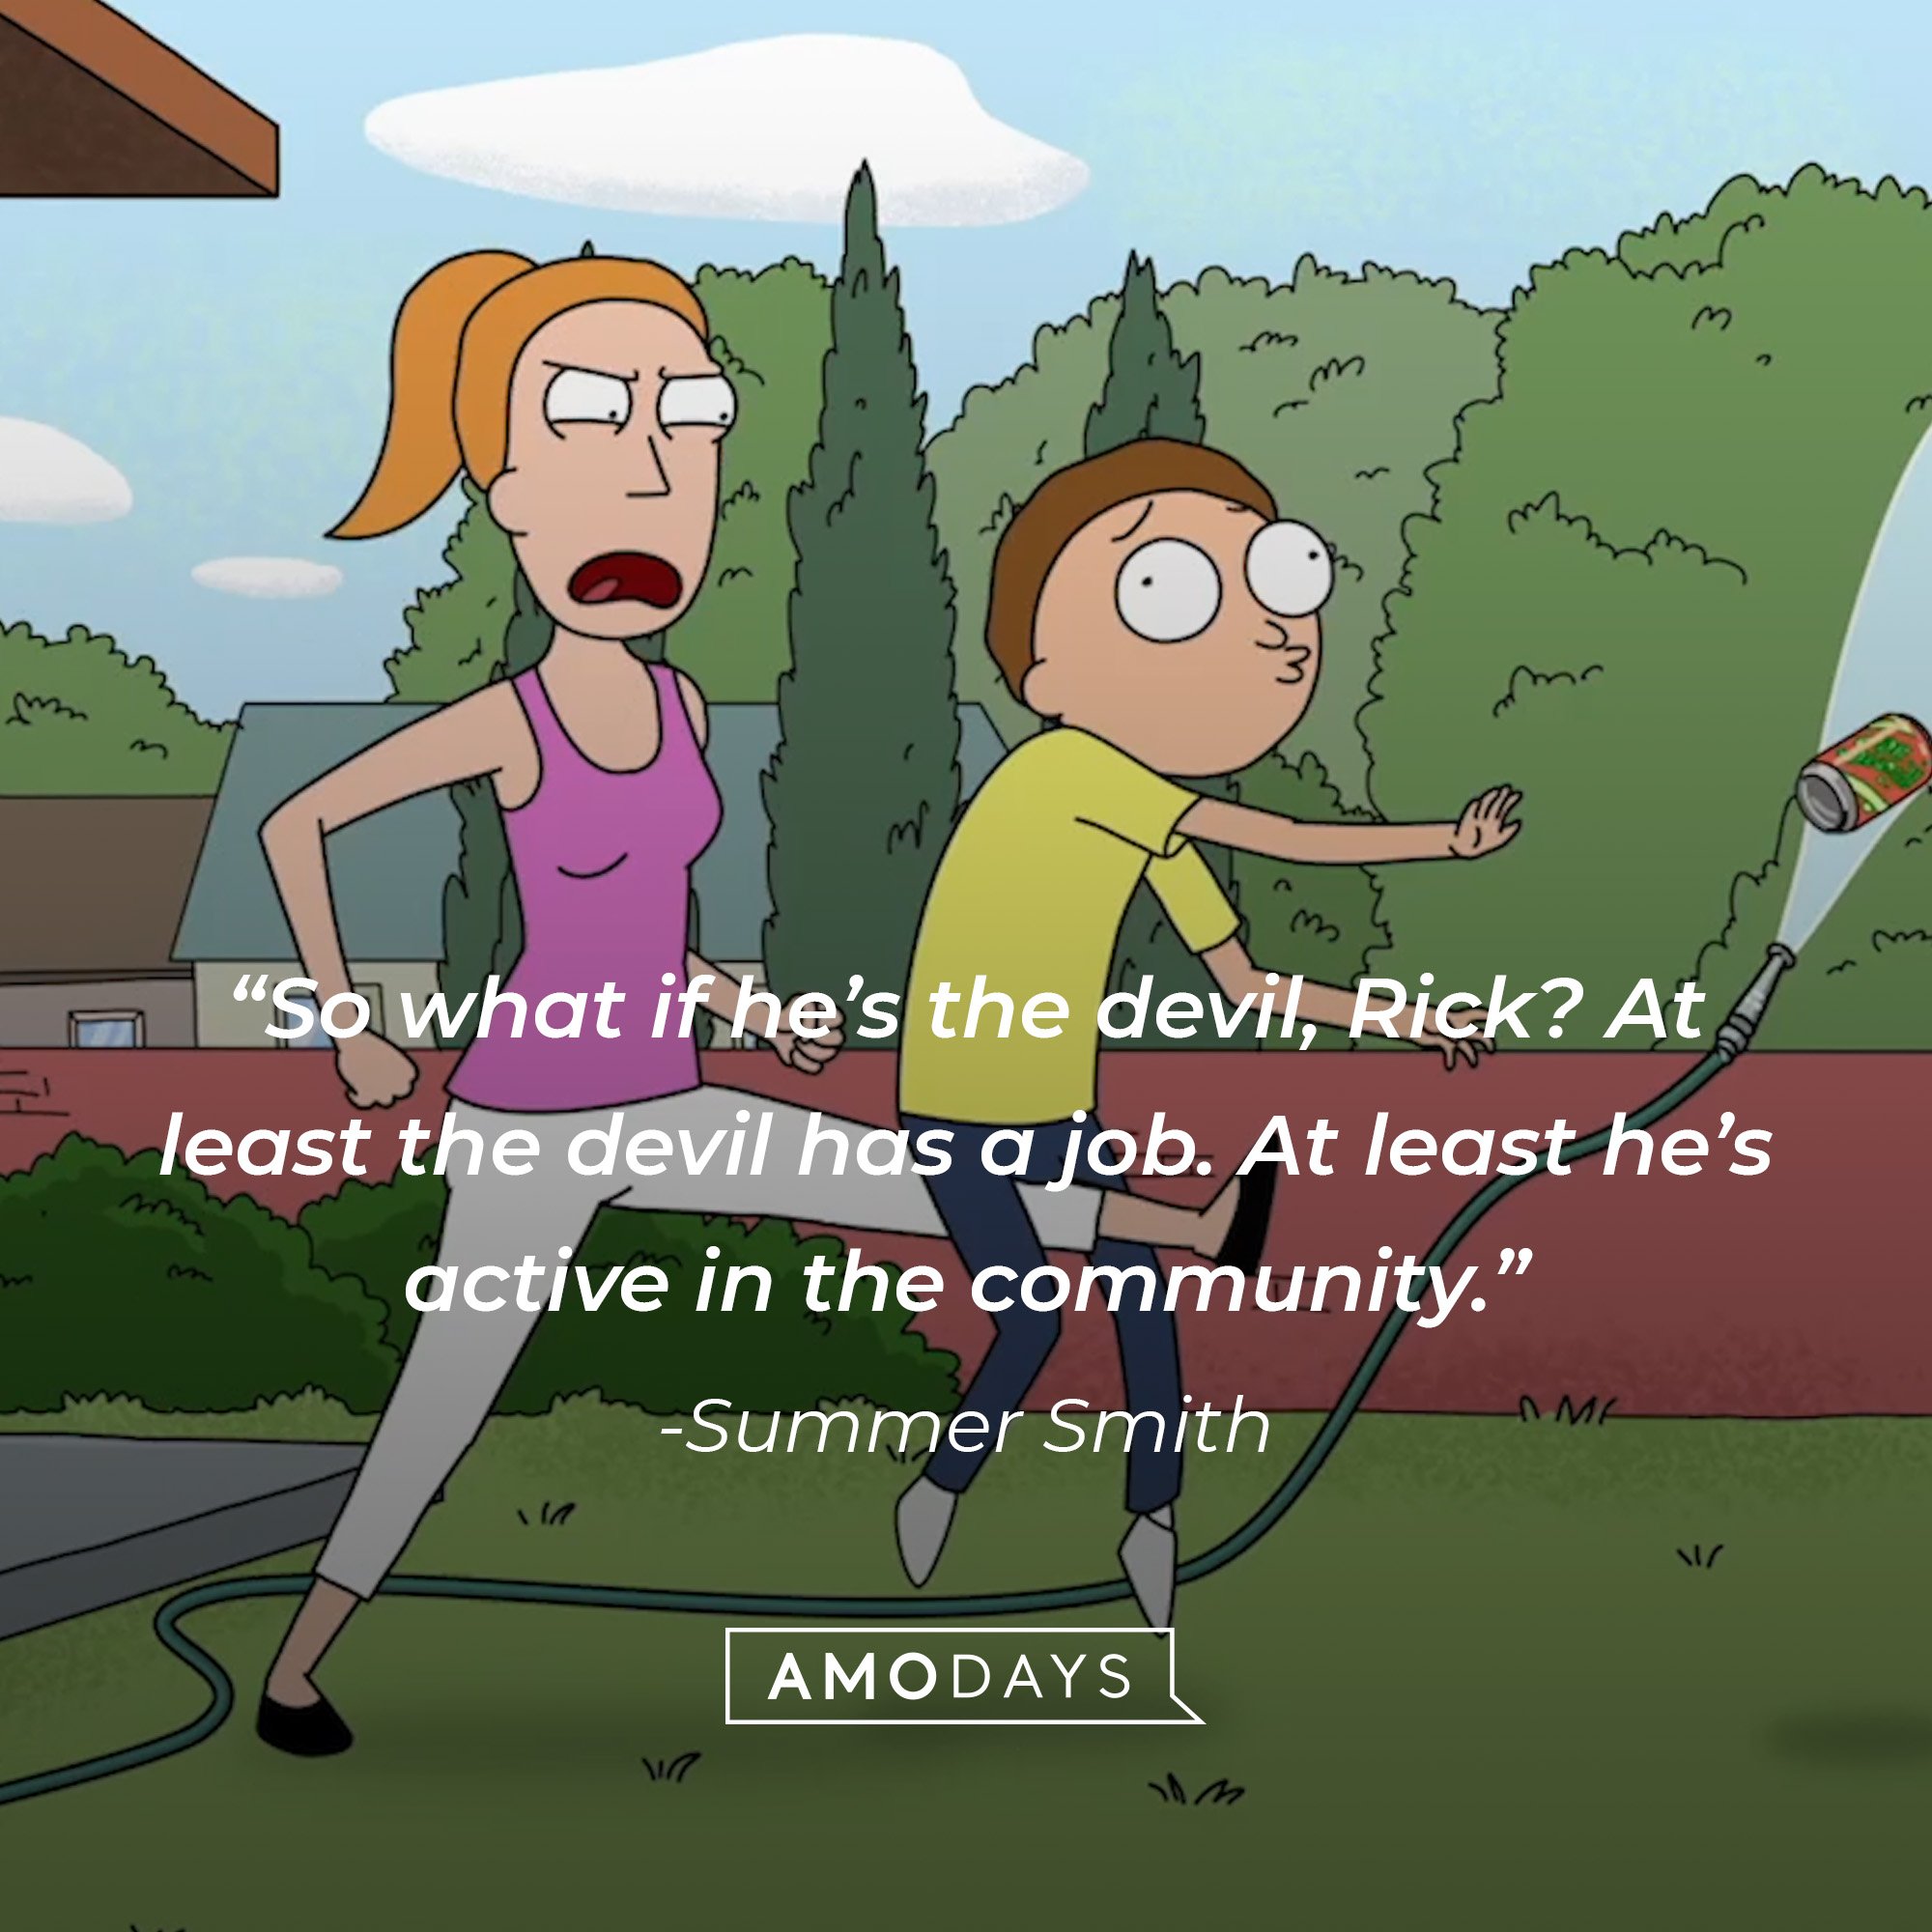 Summer Smith’s quote:“So what if he’s the devil, Rick? At least the devil has a job. At least he’s active in the community.”  | Image: AmoDays